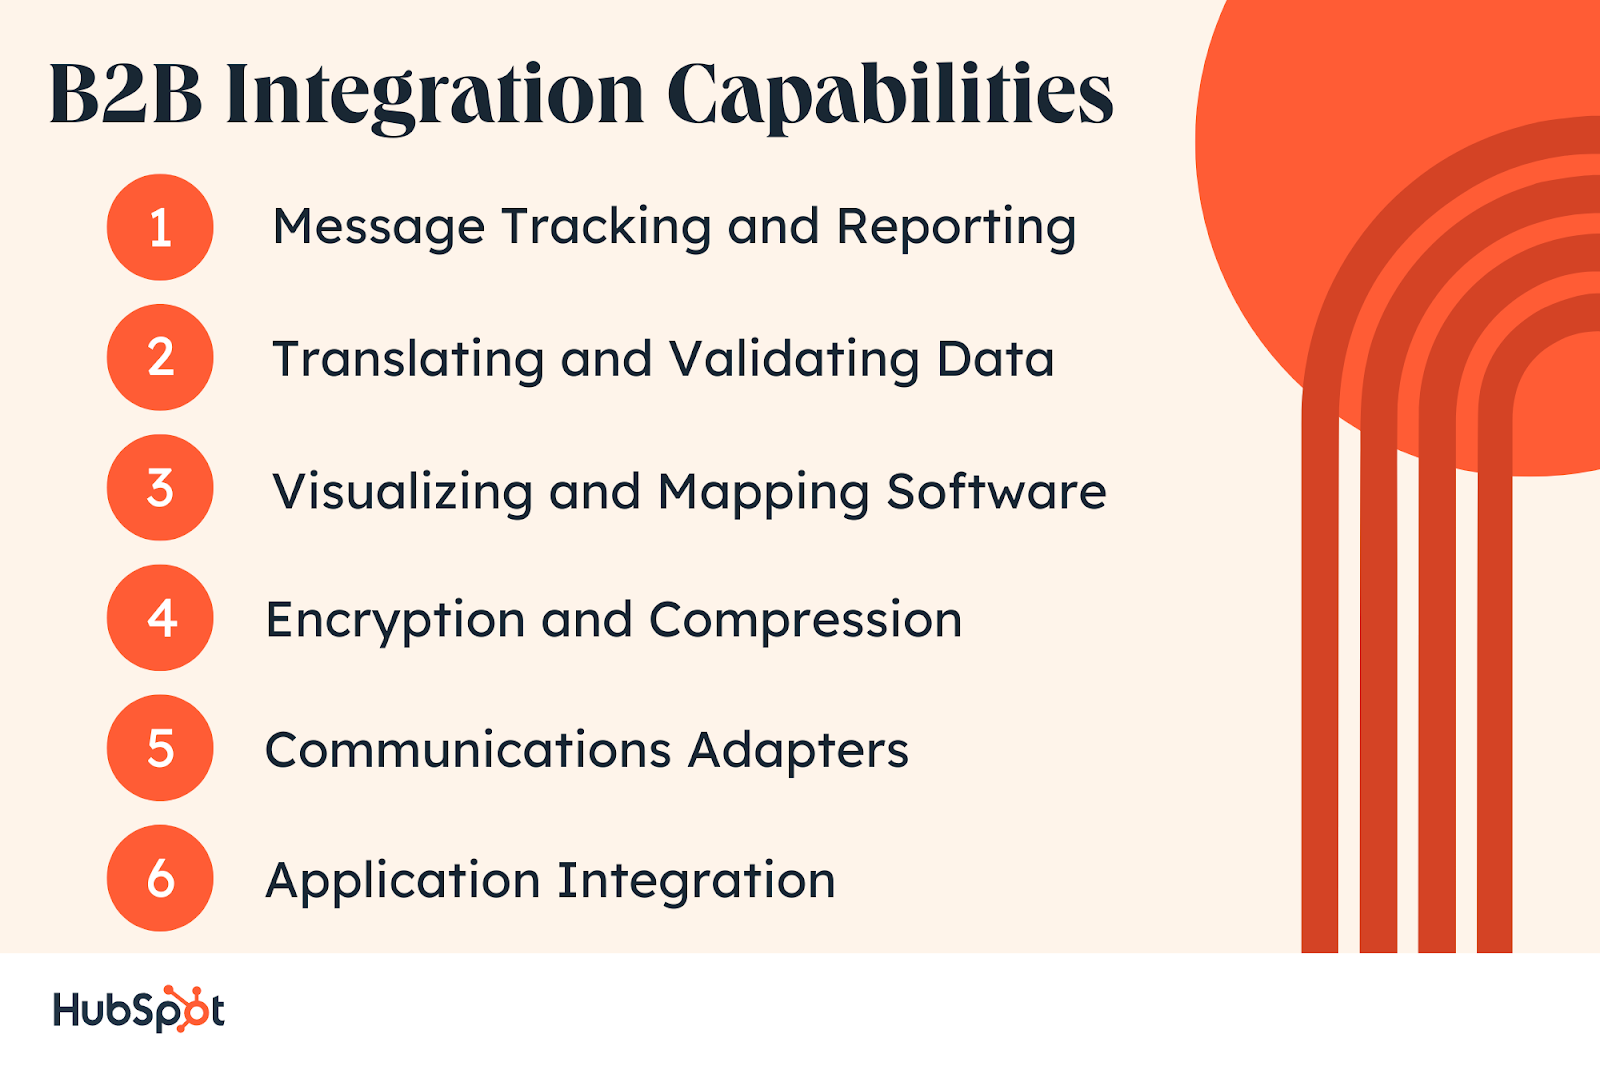 B2B Integration Capabilities. Message Tracking and Reporting. Translating and Validating Data. Visualizing and Mapping Software. Encryption and Compression. Communications Adapters. Application Integration.